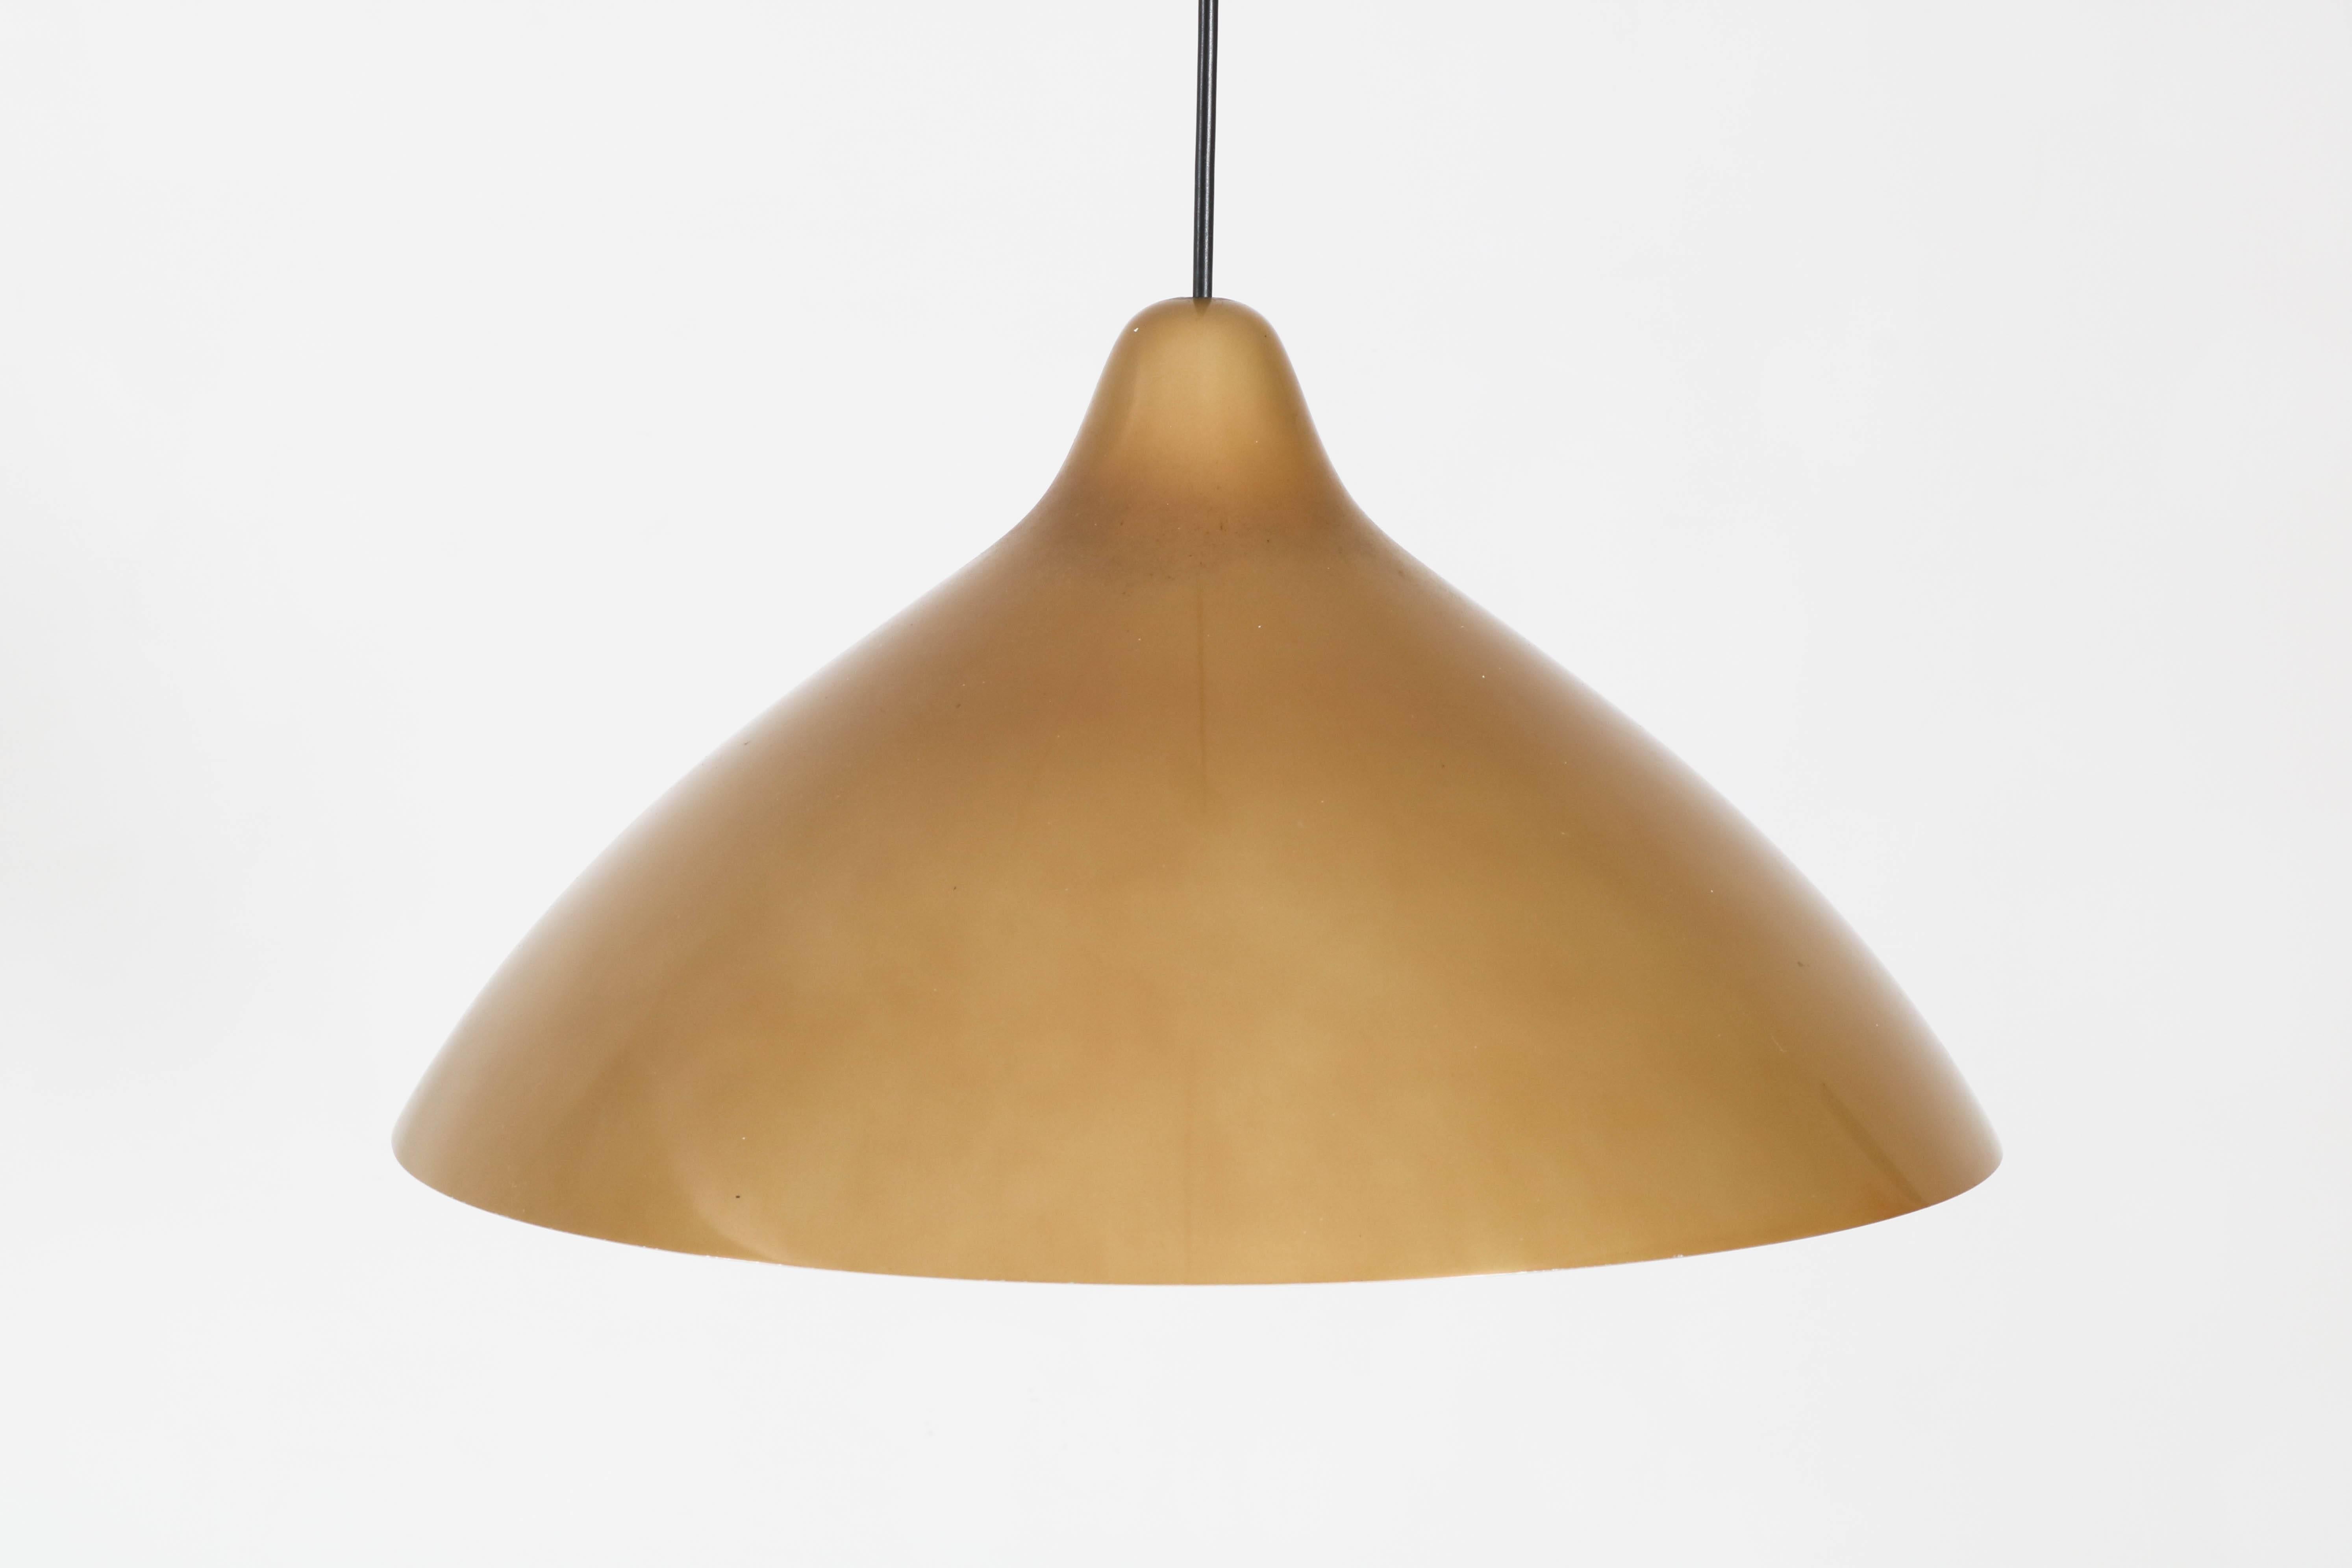 Elegant Mid-Century Modern pendant by Lisa Johansson-Pape for Stockmann Orno, 1960s.
Aluminum shade with original color.
Rests of sticker label on the inside of the shade.
In good original condition with minor wear consistent with age and